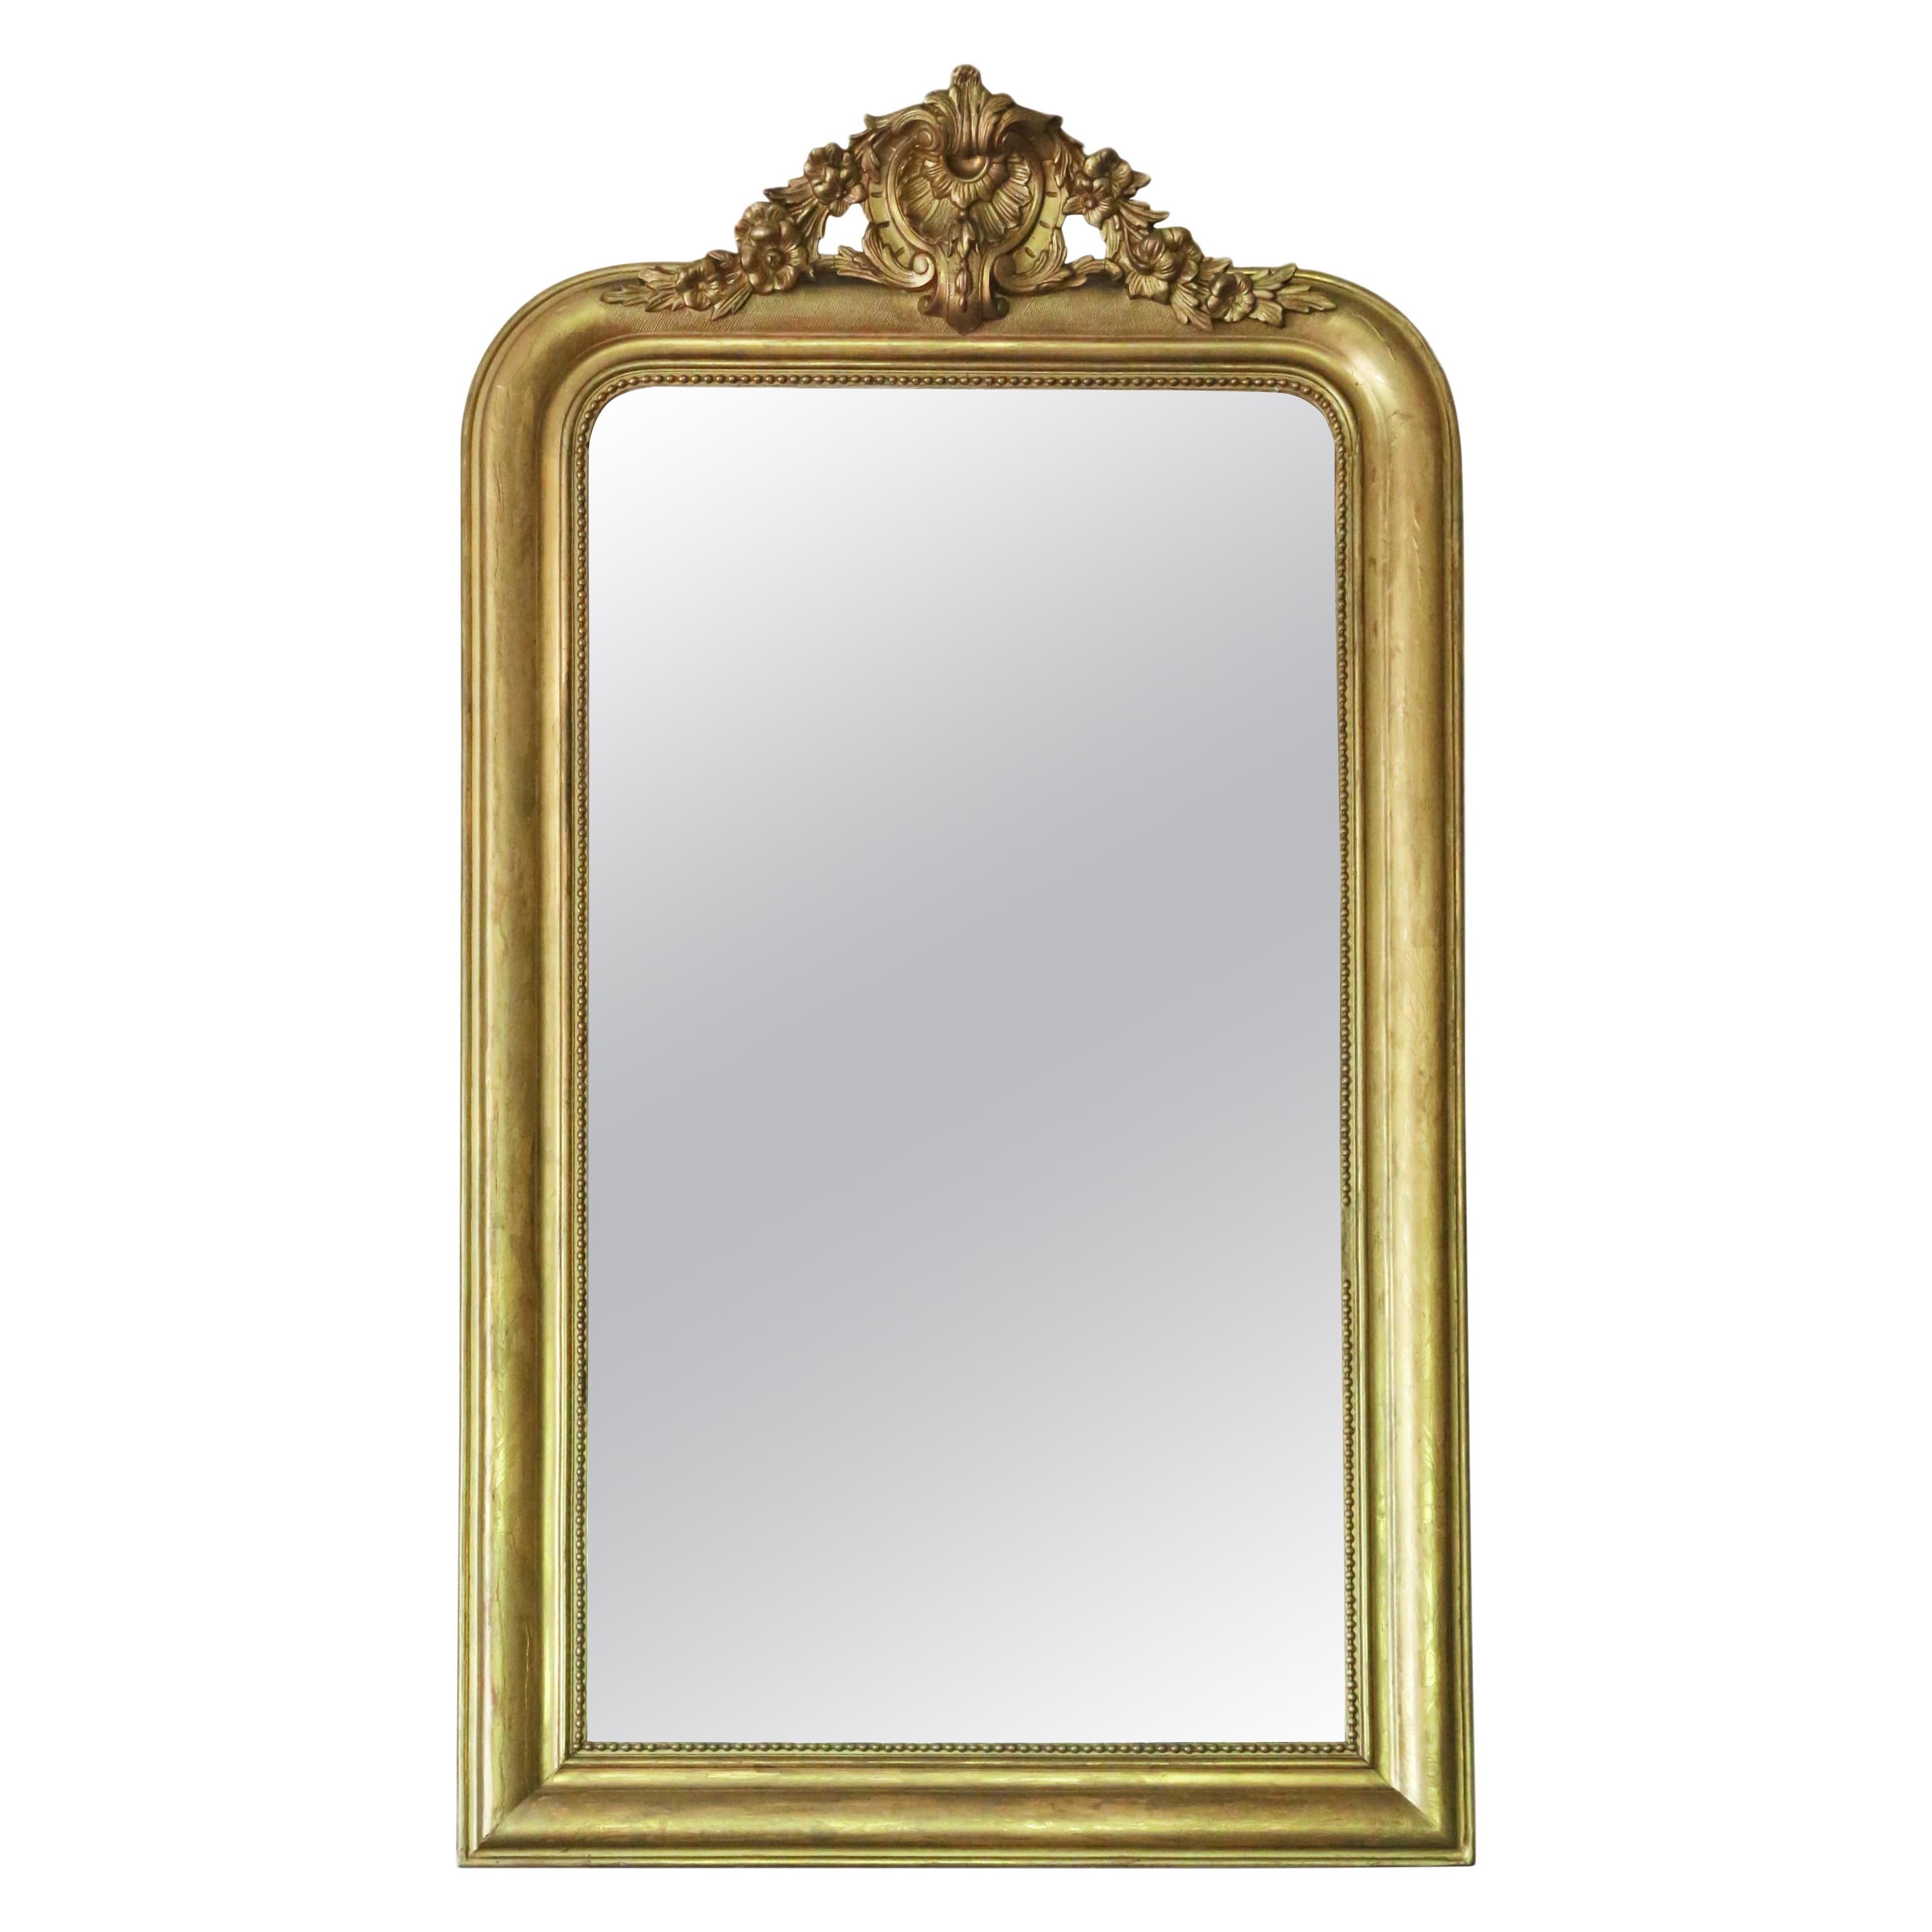 Antique Large Gilt 19th Century Overmantle Wall Mirror